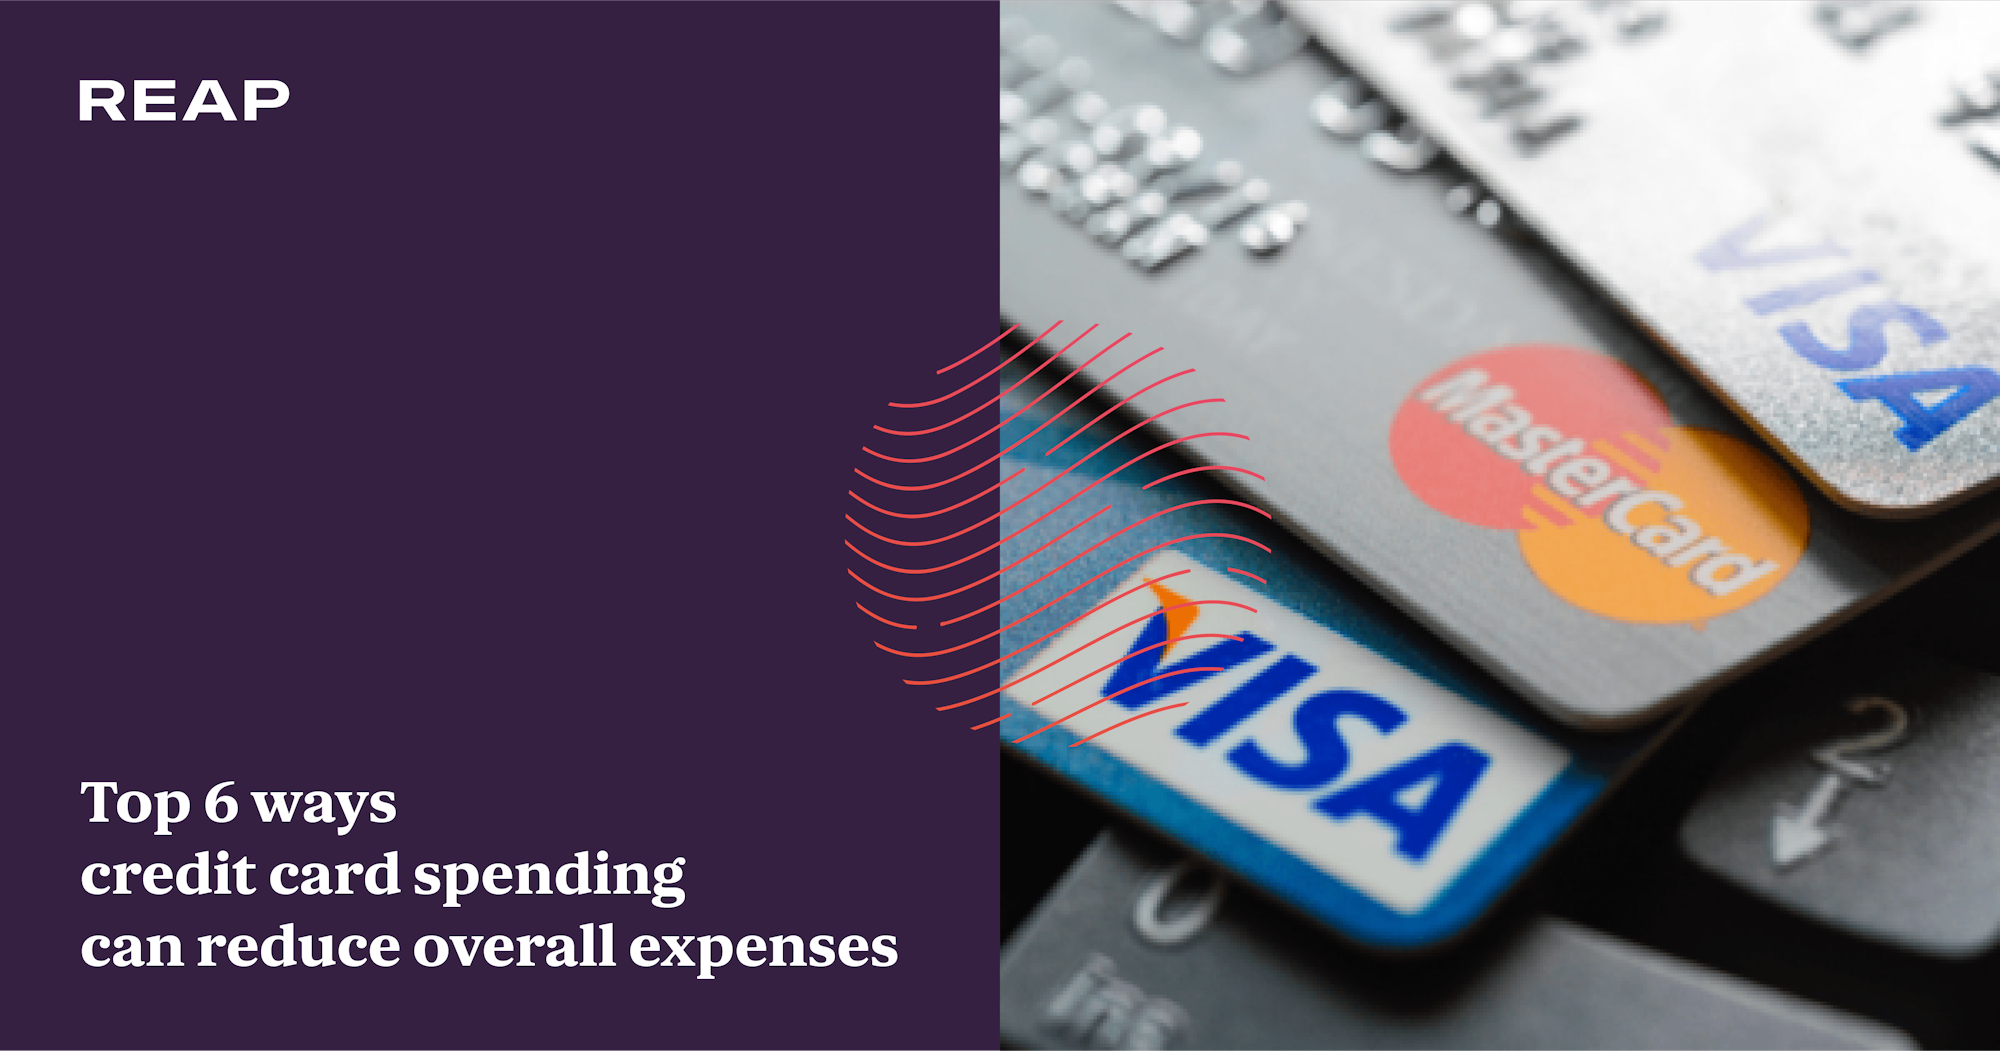 Cover Image for Top 6 ways credit card spending can reduce overall expenses